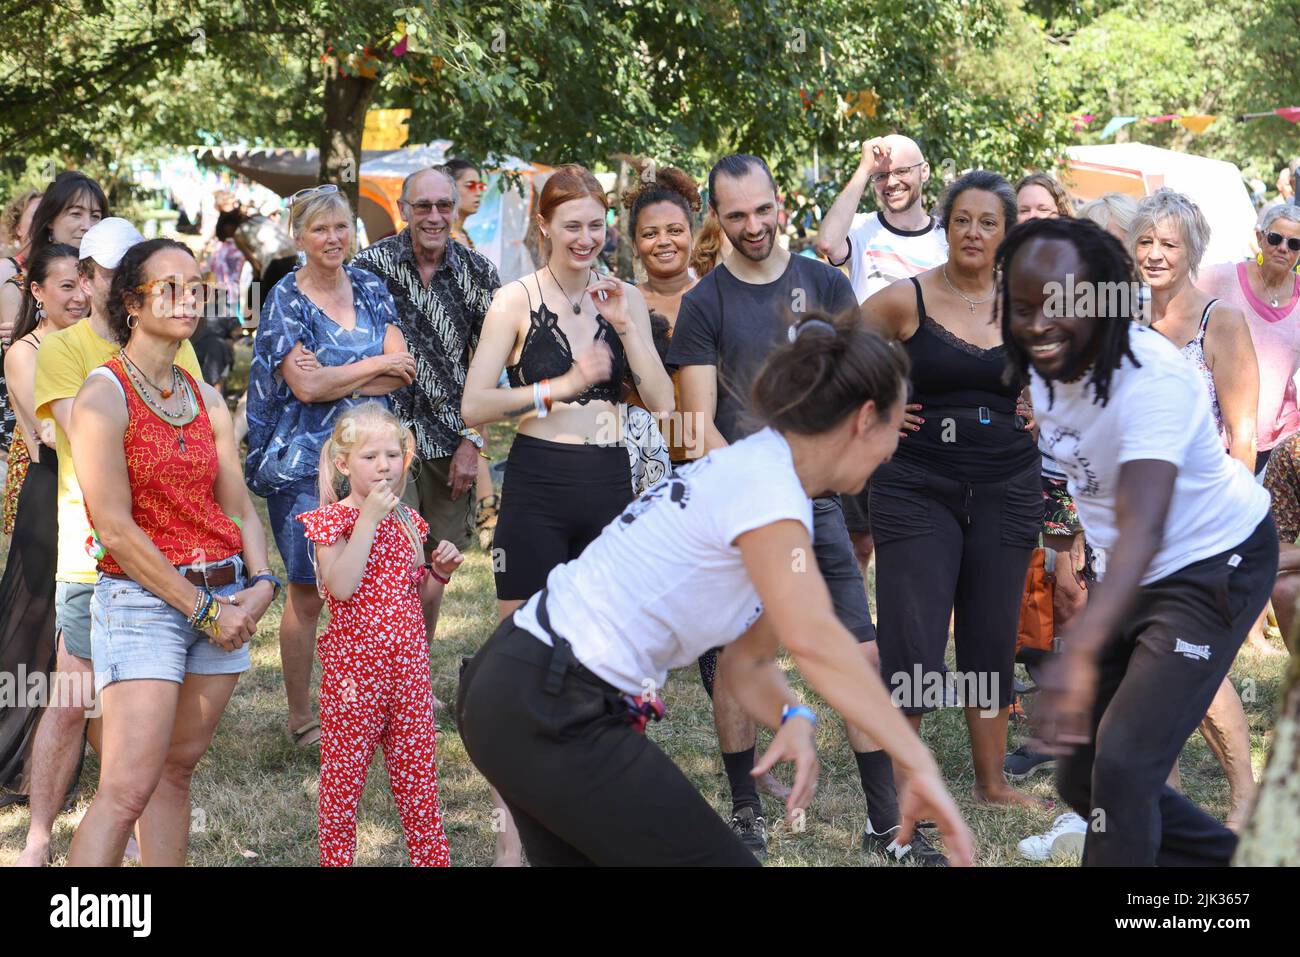 Wiltshire, UK. 29th July, 2022. 29th July 2022, Womad Festival, Charlton Park, Malmesbury, Wiltshire.  Brazilian Capoeira workshop in the beautiful leafy surroundings of the arboretum  The WOMAD Festival held its first event in 1982 at the Bath and West Showground in Shepton Mallet, Somerset. Over the intervening 40 years, the Peter Gabriel fronted organisation has hosted festivals across the globe, from Spain to New Zealand, Chile to Abu Dhabi. For the 40th anniversary its flagship UK festival is held this weekend from 28-30 July at Charlton Park. WOMAD - World of Music, Arts and Dance. Credi Stock Photo